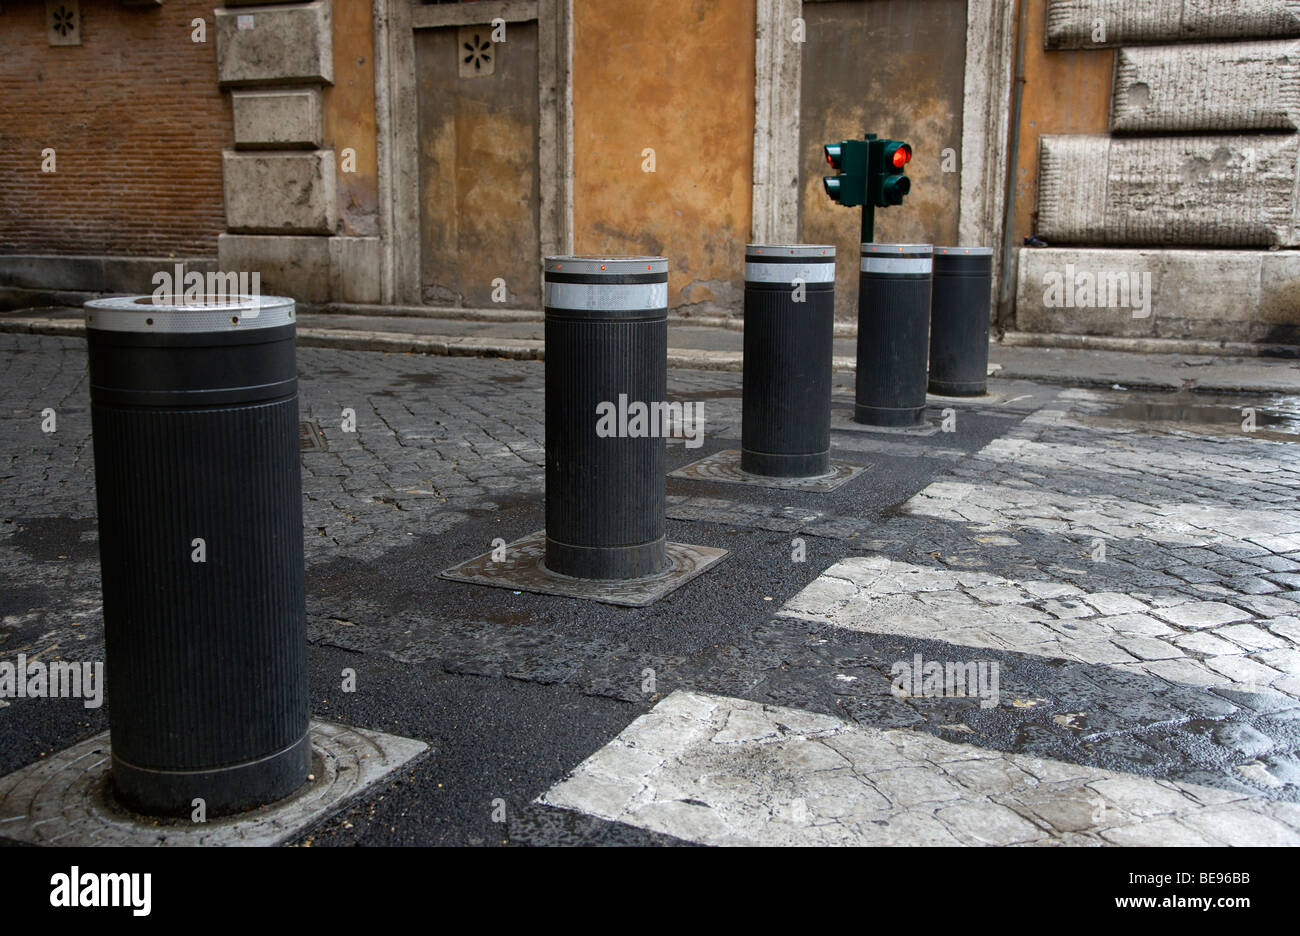 ITALY Rome Lazio Automatic rising bollards barrier and pedestrian crossing in street with red and green traffic control lights. Stock Photo